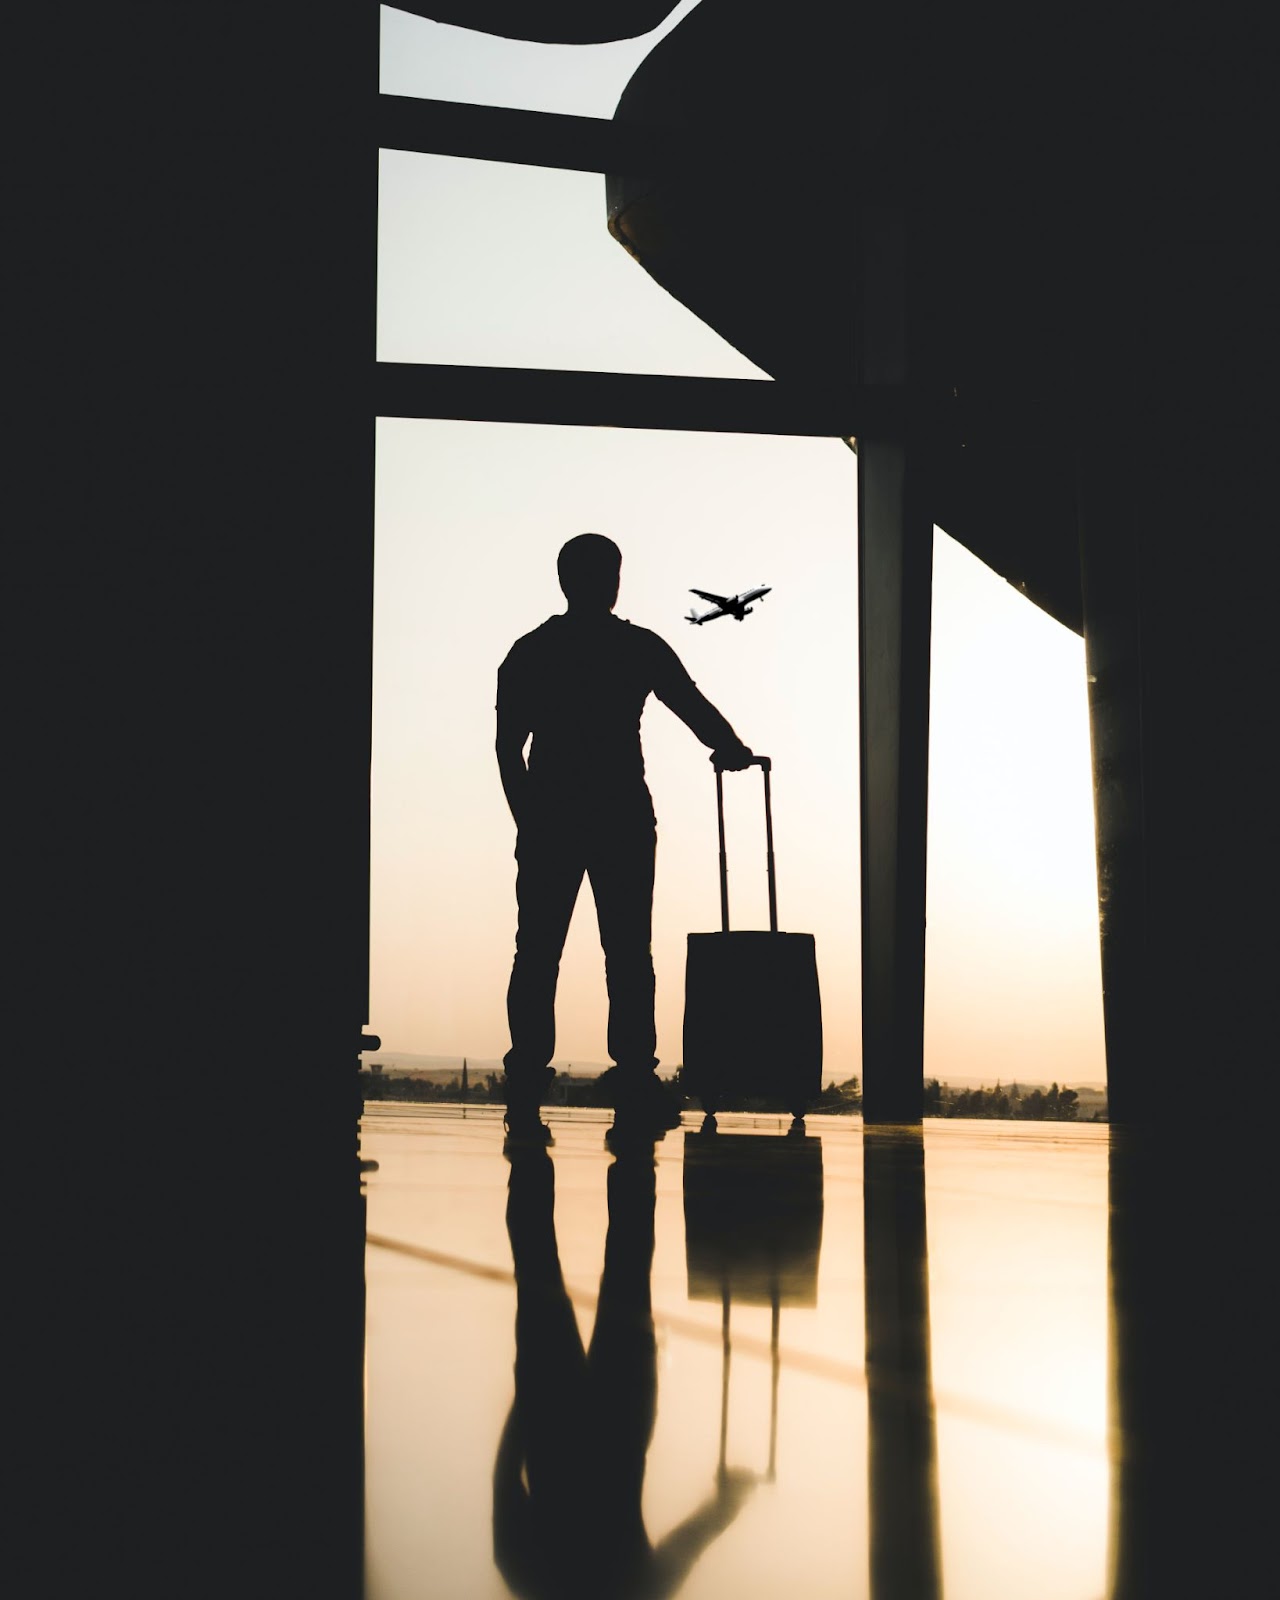 Man standing at airport with luggage watching plane take off